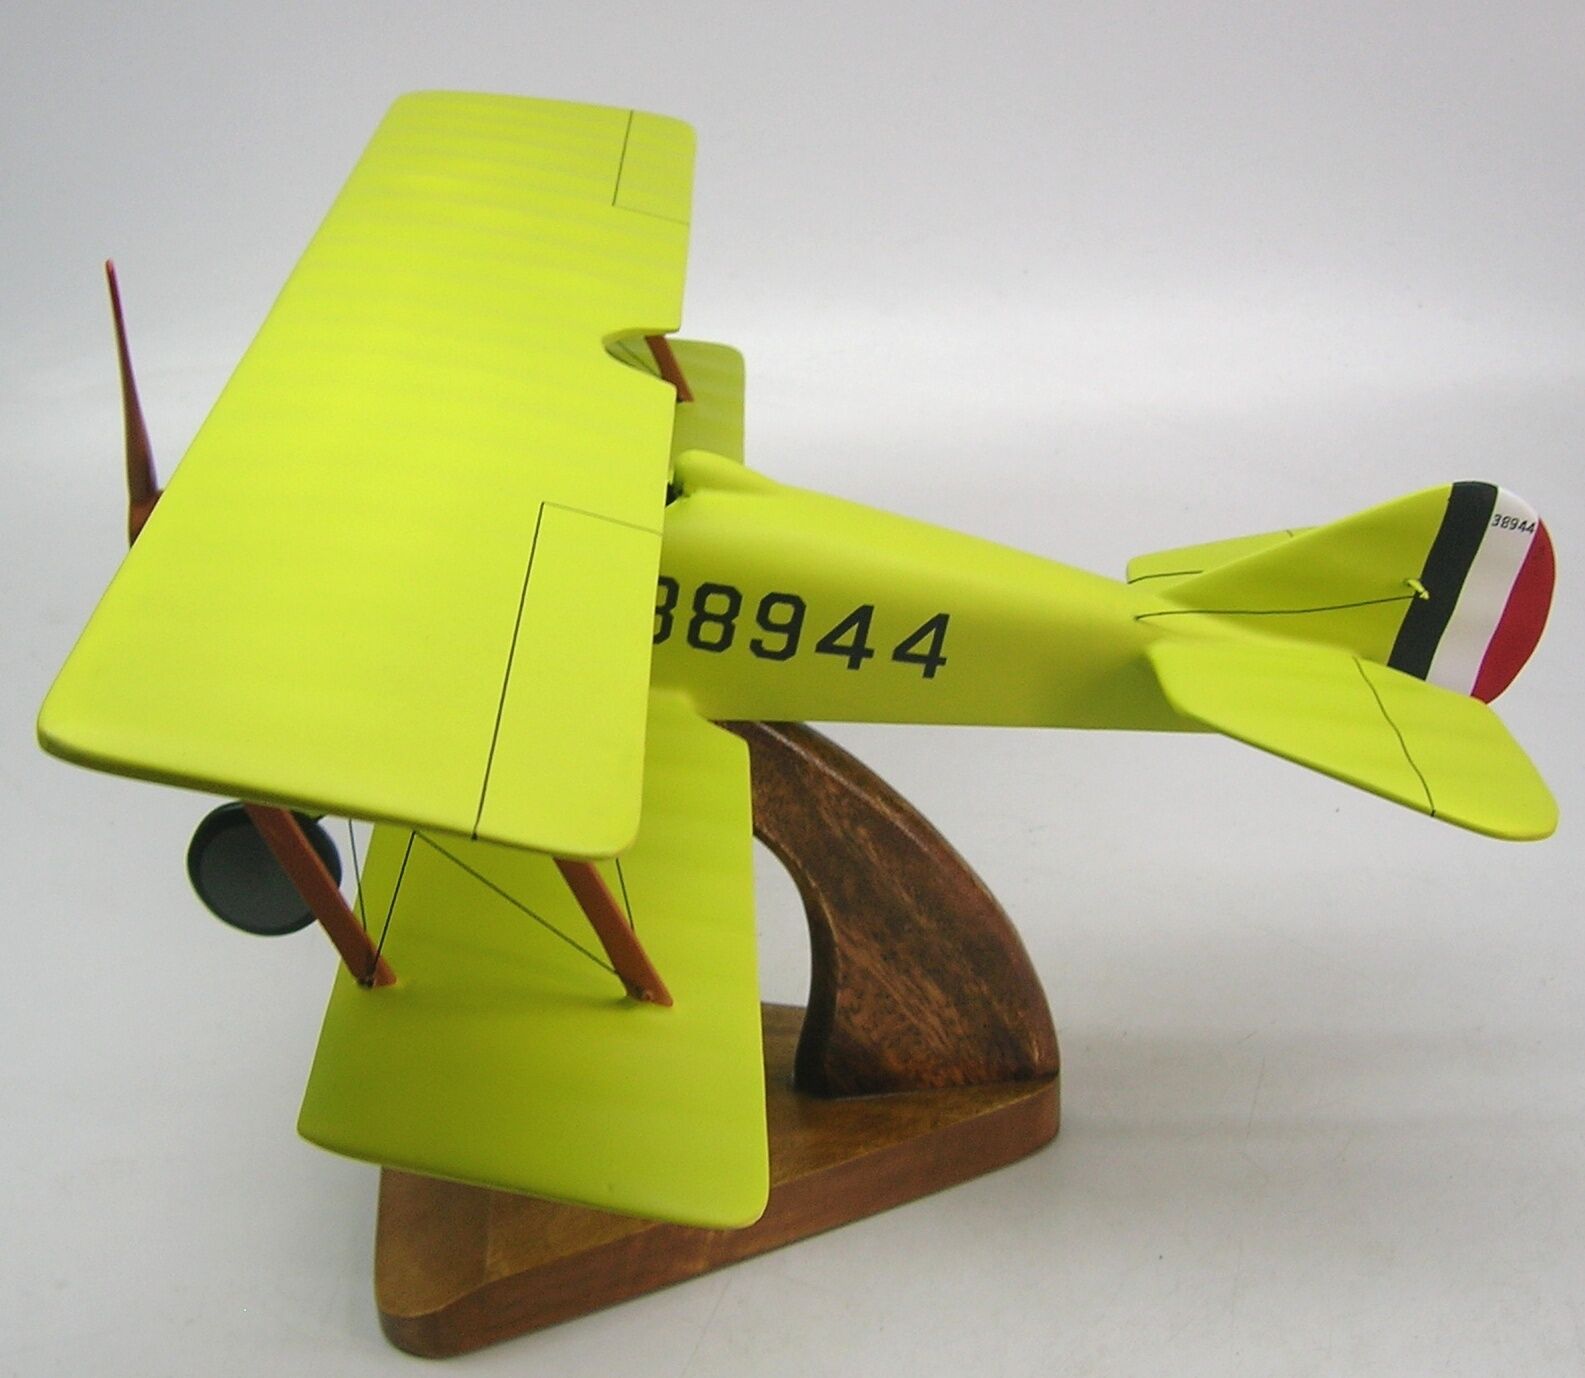 Thomas-Morse S-4-C Scout Trainer Airplane Wood Model Replica Large 